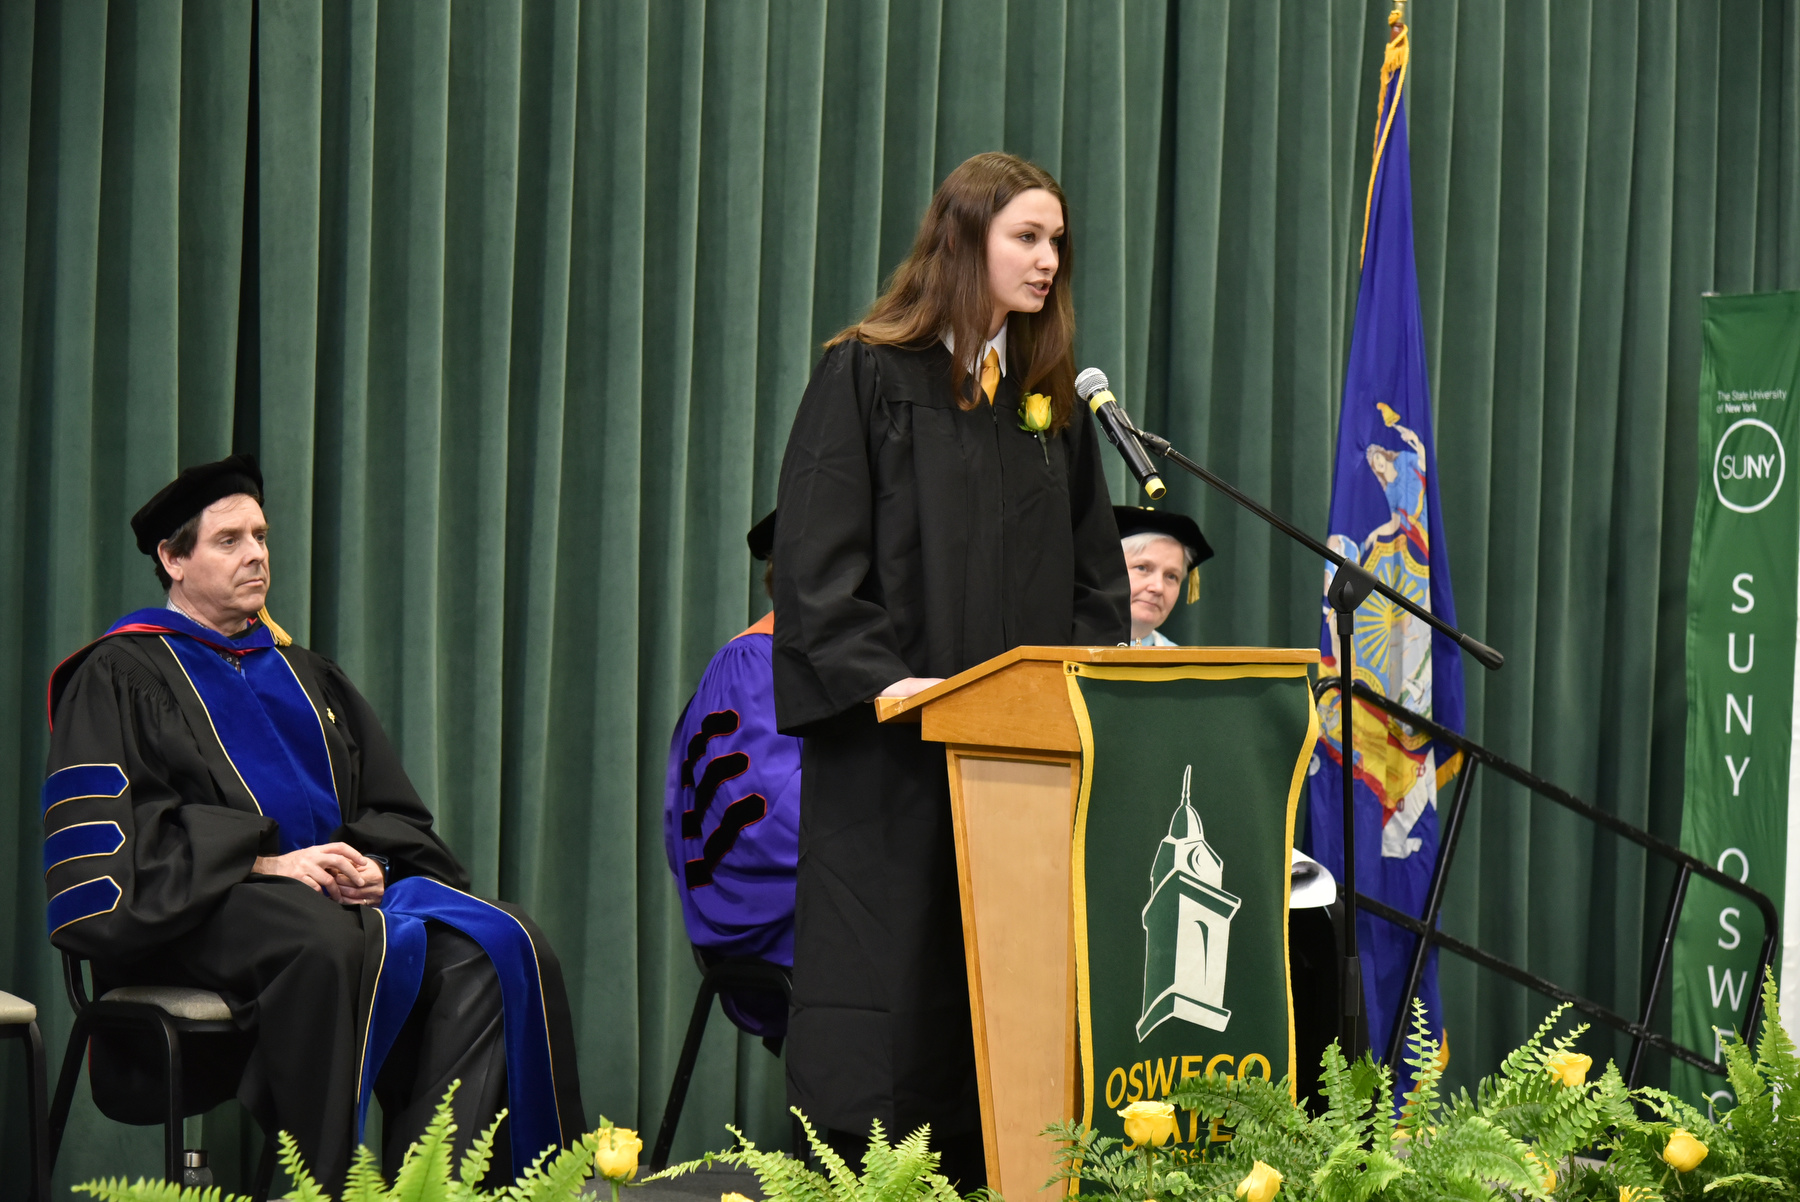 Vega President Kylie Annable offers opening remarks at Honors Convocation held April 21 in the Deborah F. Stanley Convocation Hall and Arena, Marano Campus Center. 